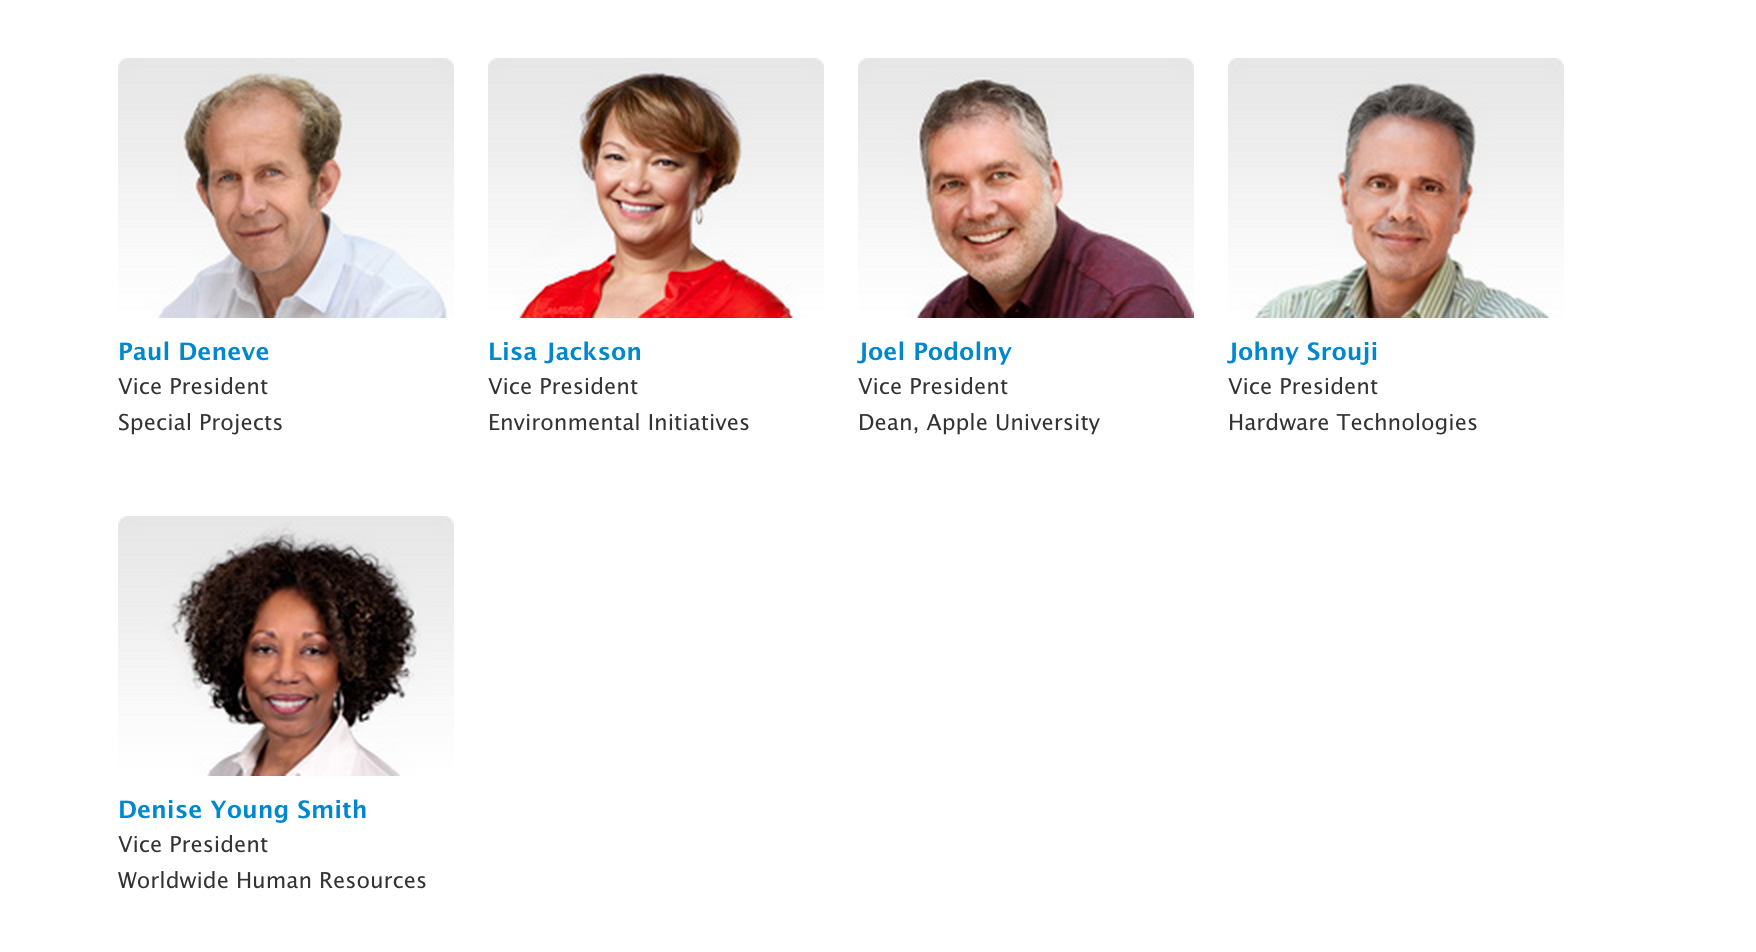 Apple profiles the Vice Presidents that report to Tim Cook